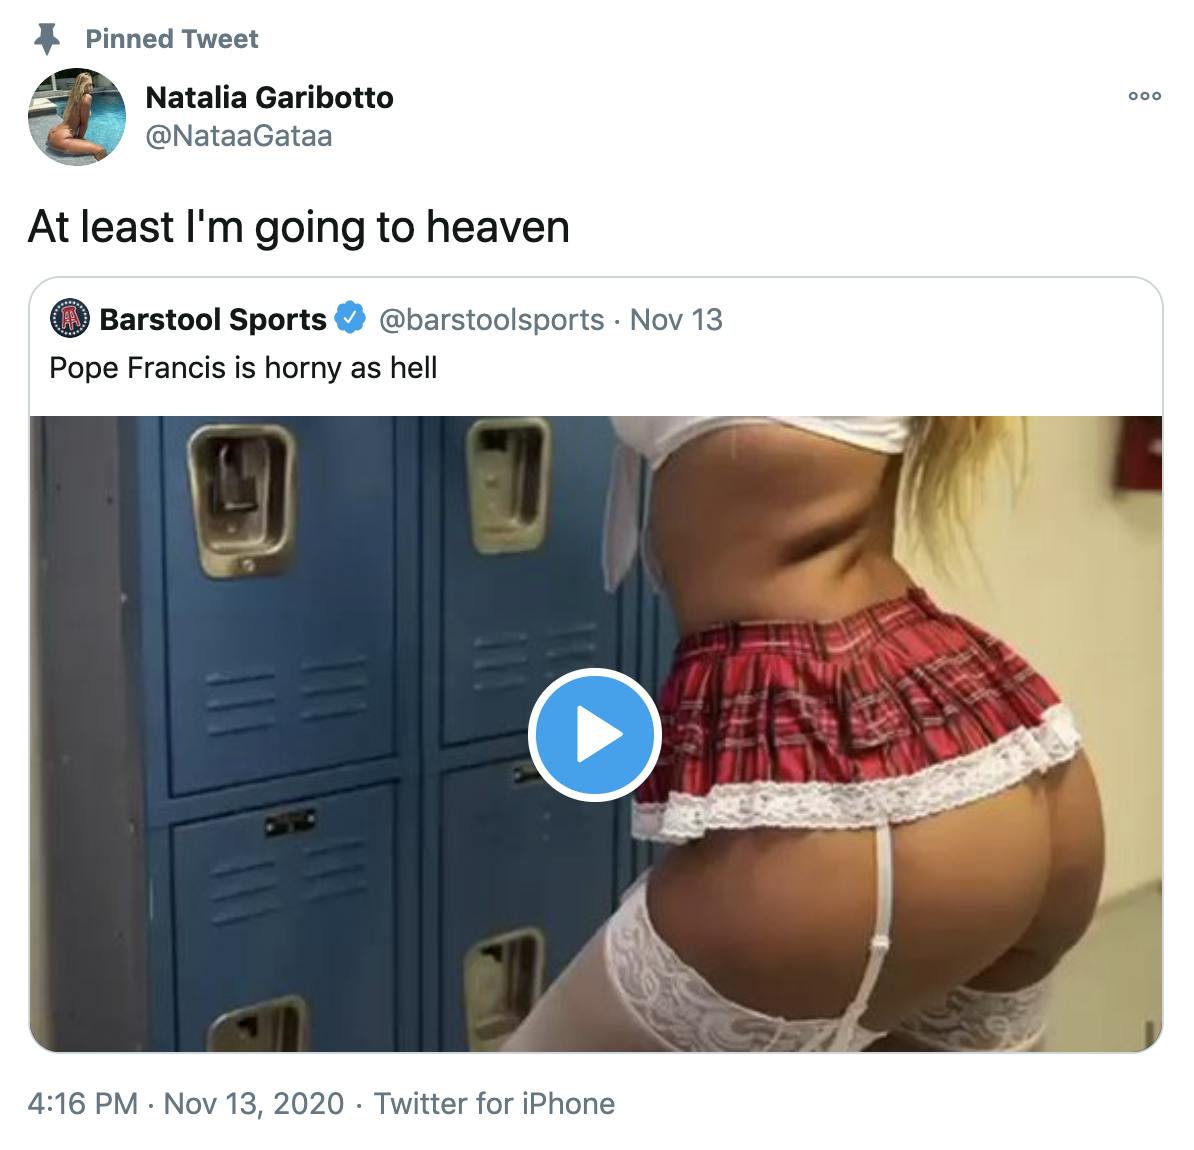 'At least I'm going to heaven' Embedded tweet featuring the bar stool sports video about it